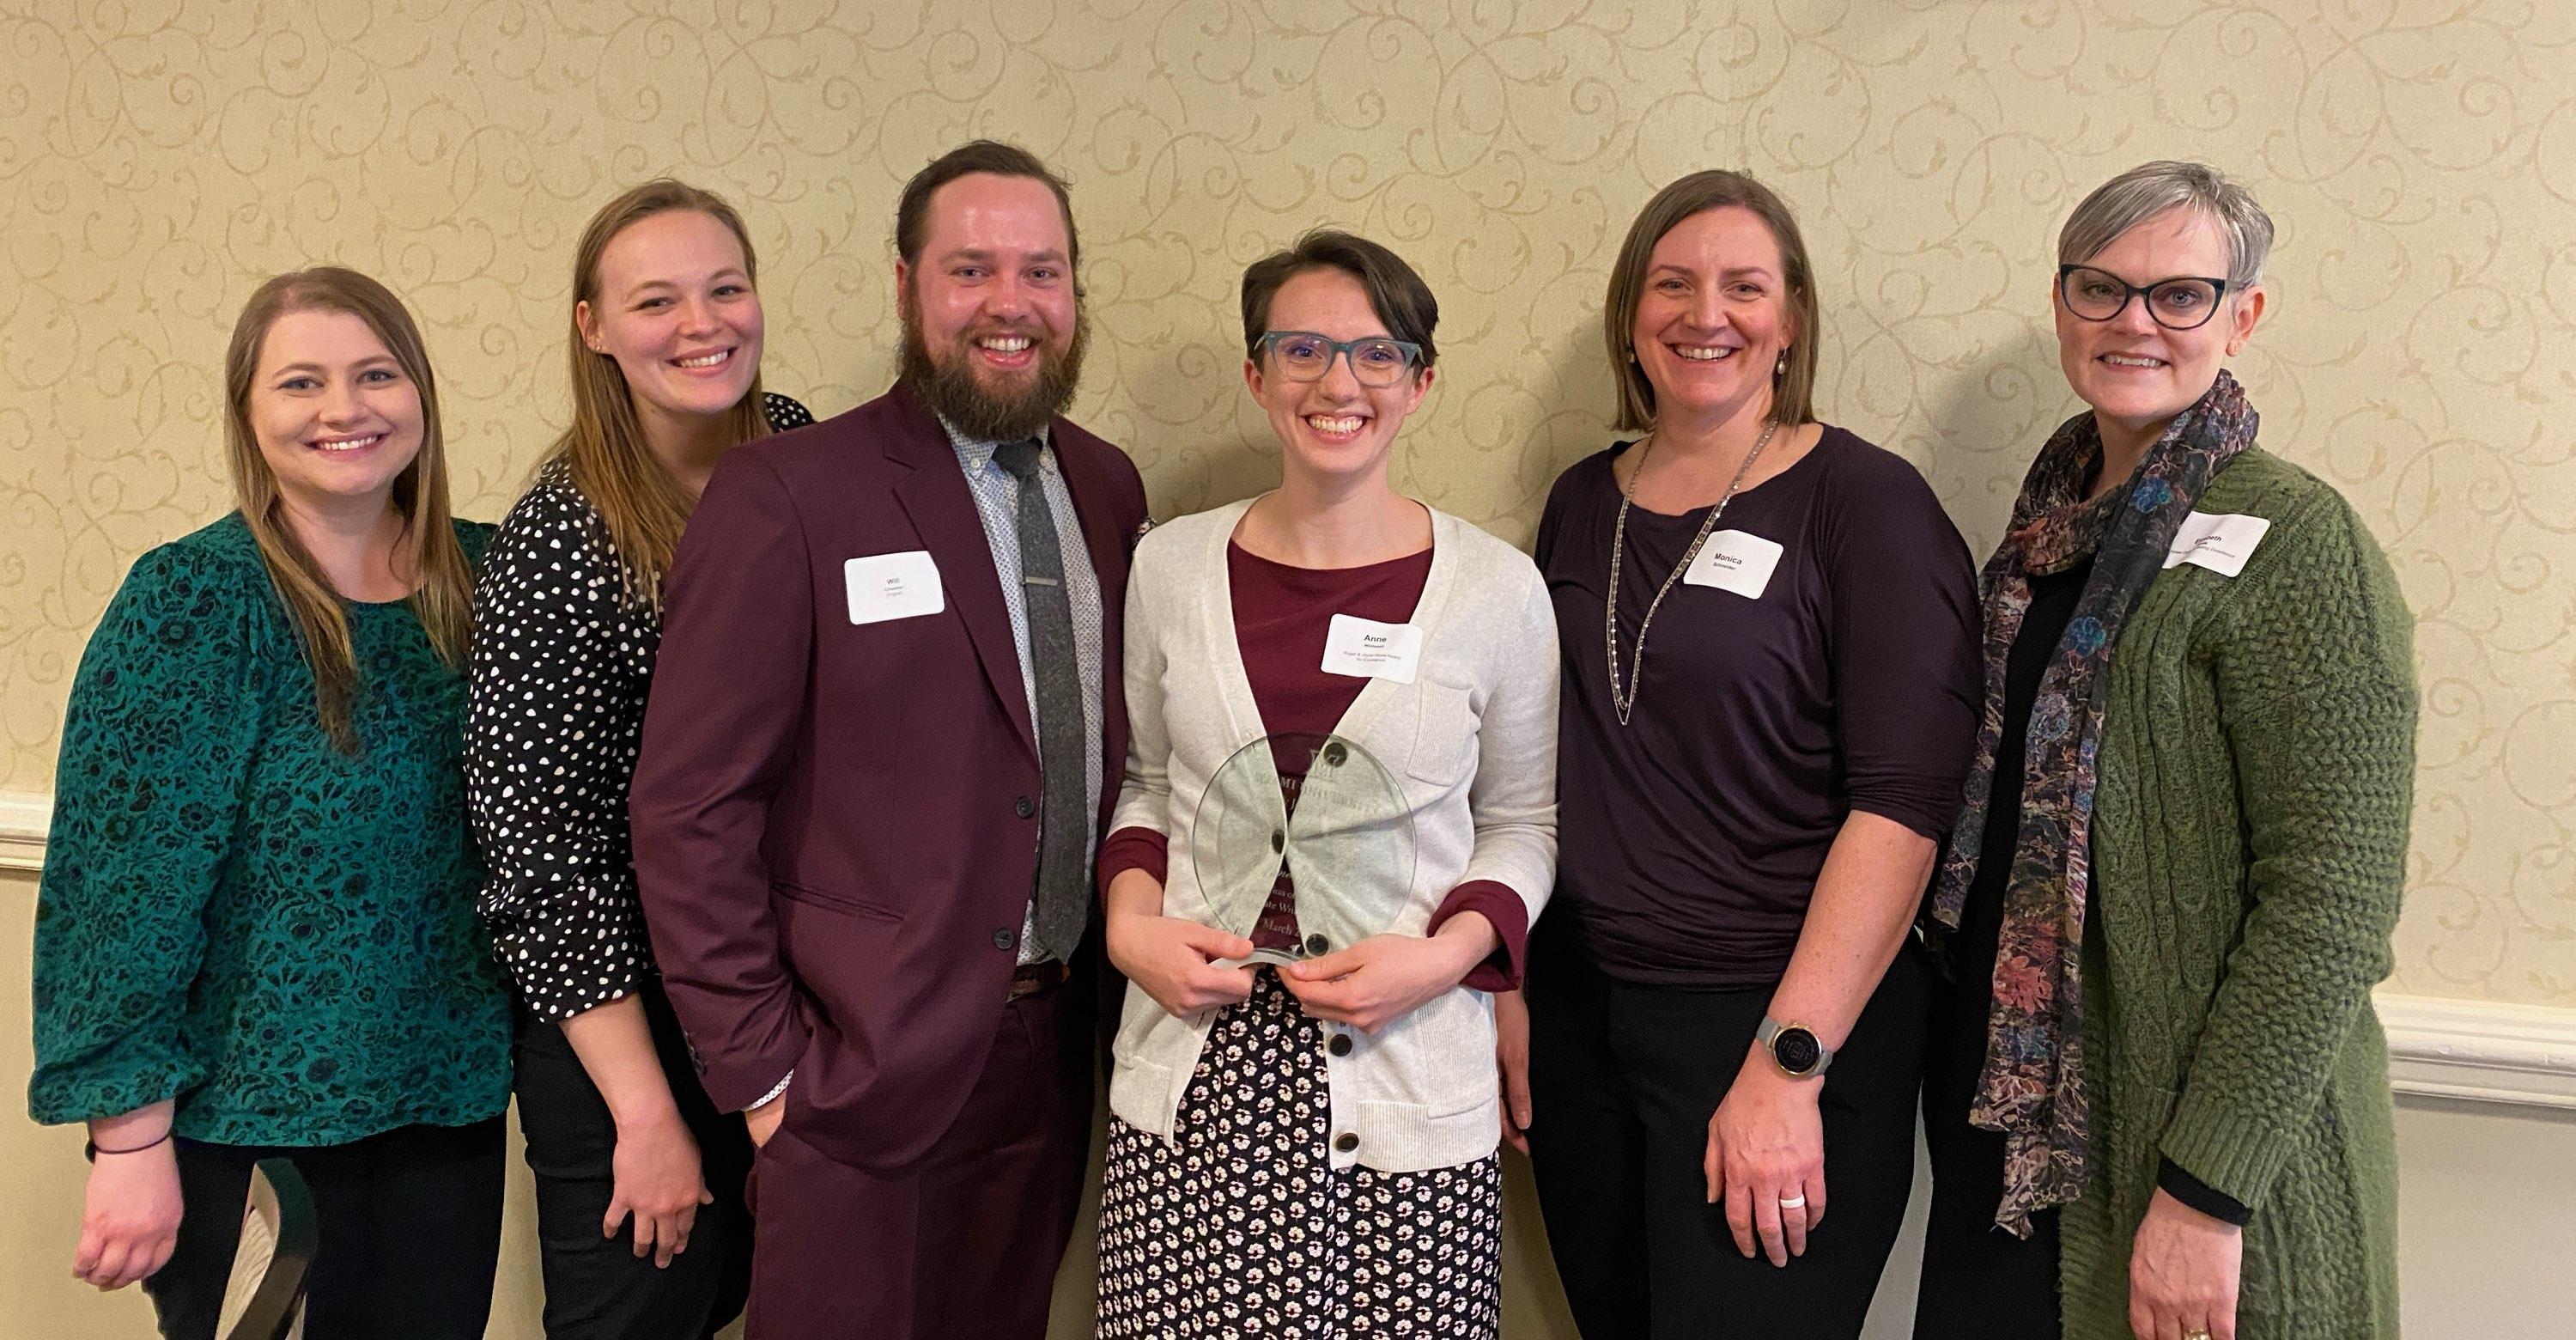 from l-r: Rena Perez, Mandy Olejnik, Will Chesher, Anne Whitesell, Monica Schnieder, and Elizabeth Wardle at the March 20 University Awards Ceremony. 